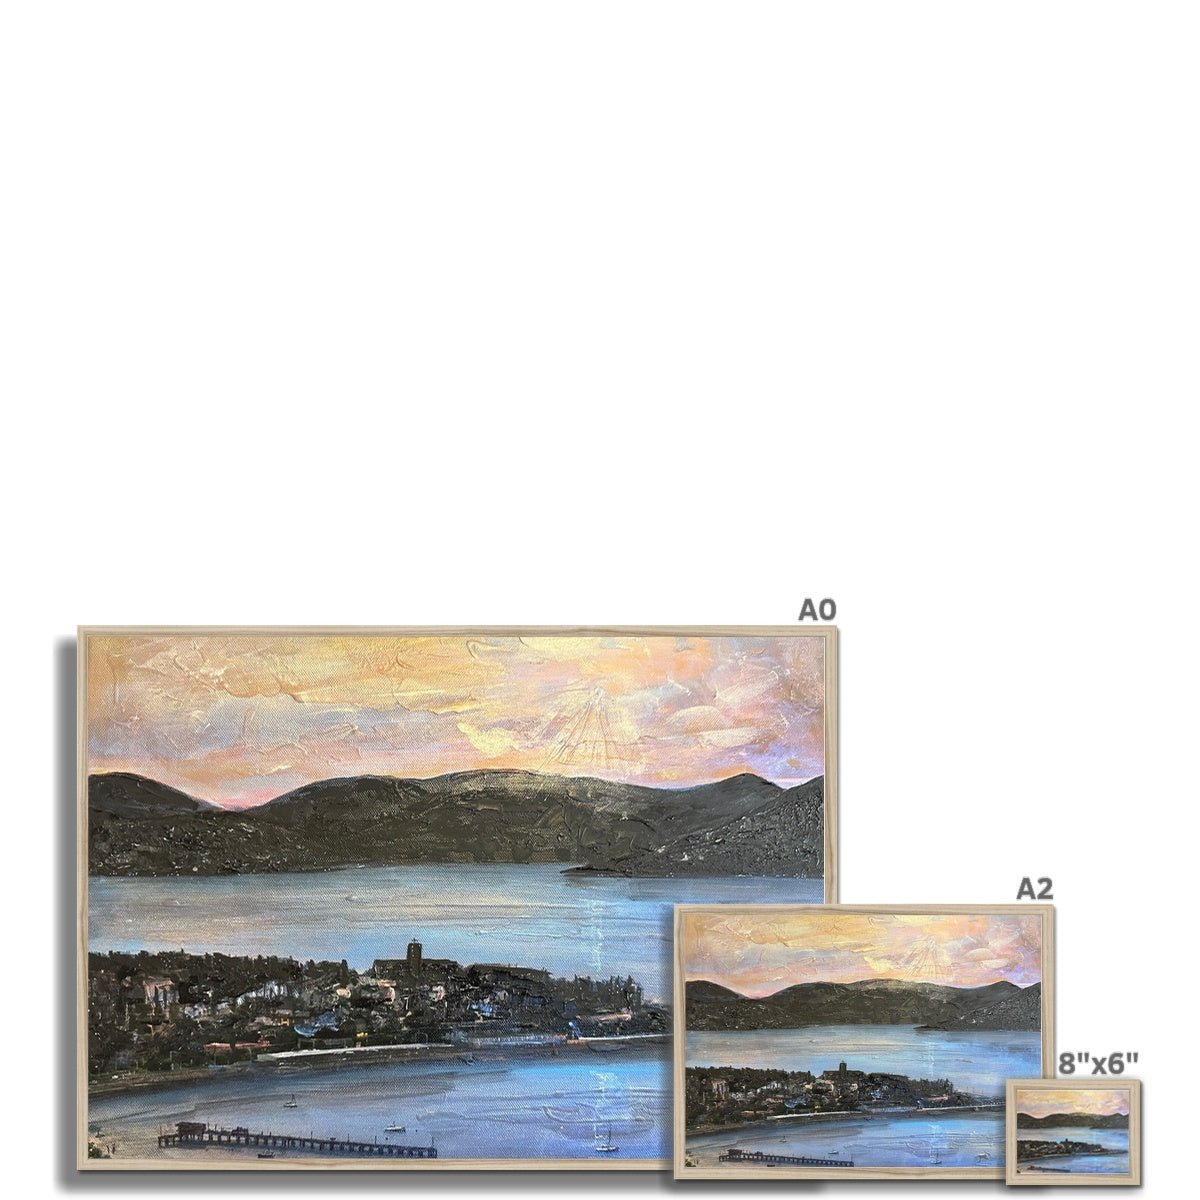 From Lyle Hill Painting | Framed Prints From Scotland-Framed Prints-River Clyde Art Gallery-Paintings, Prints, Homeware, Art Gifts From Scotland By Scottish Artist Kevin Hunter